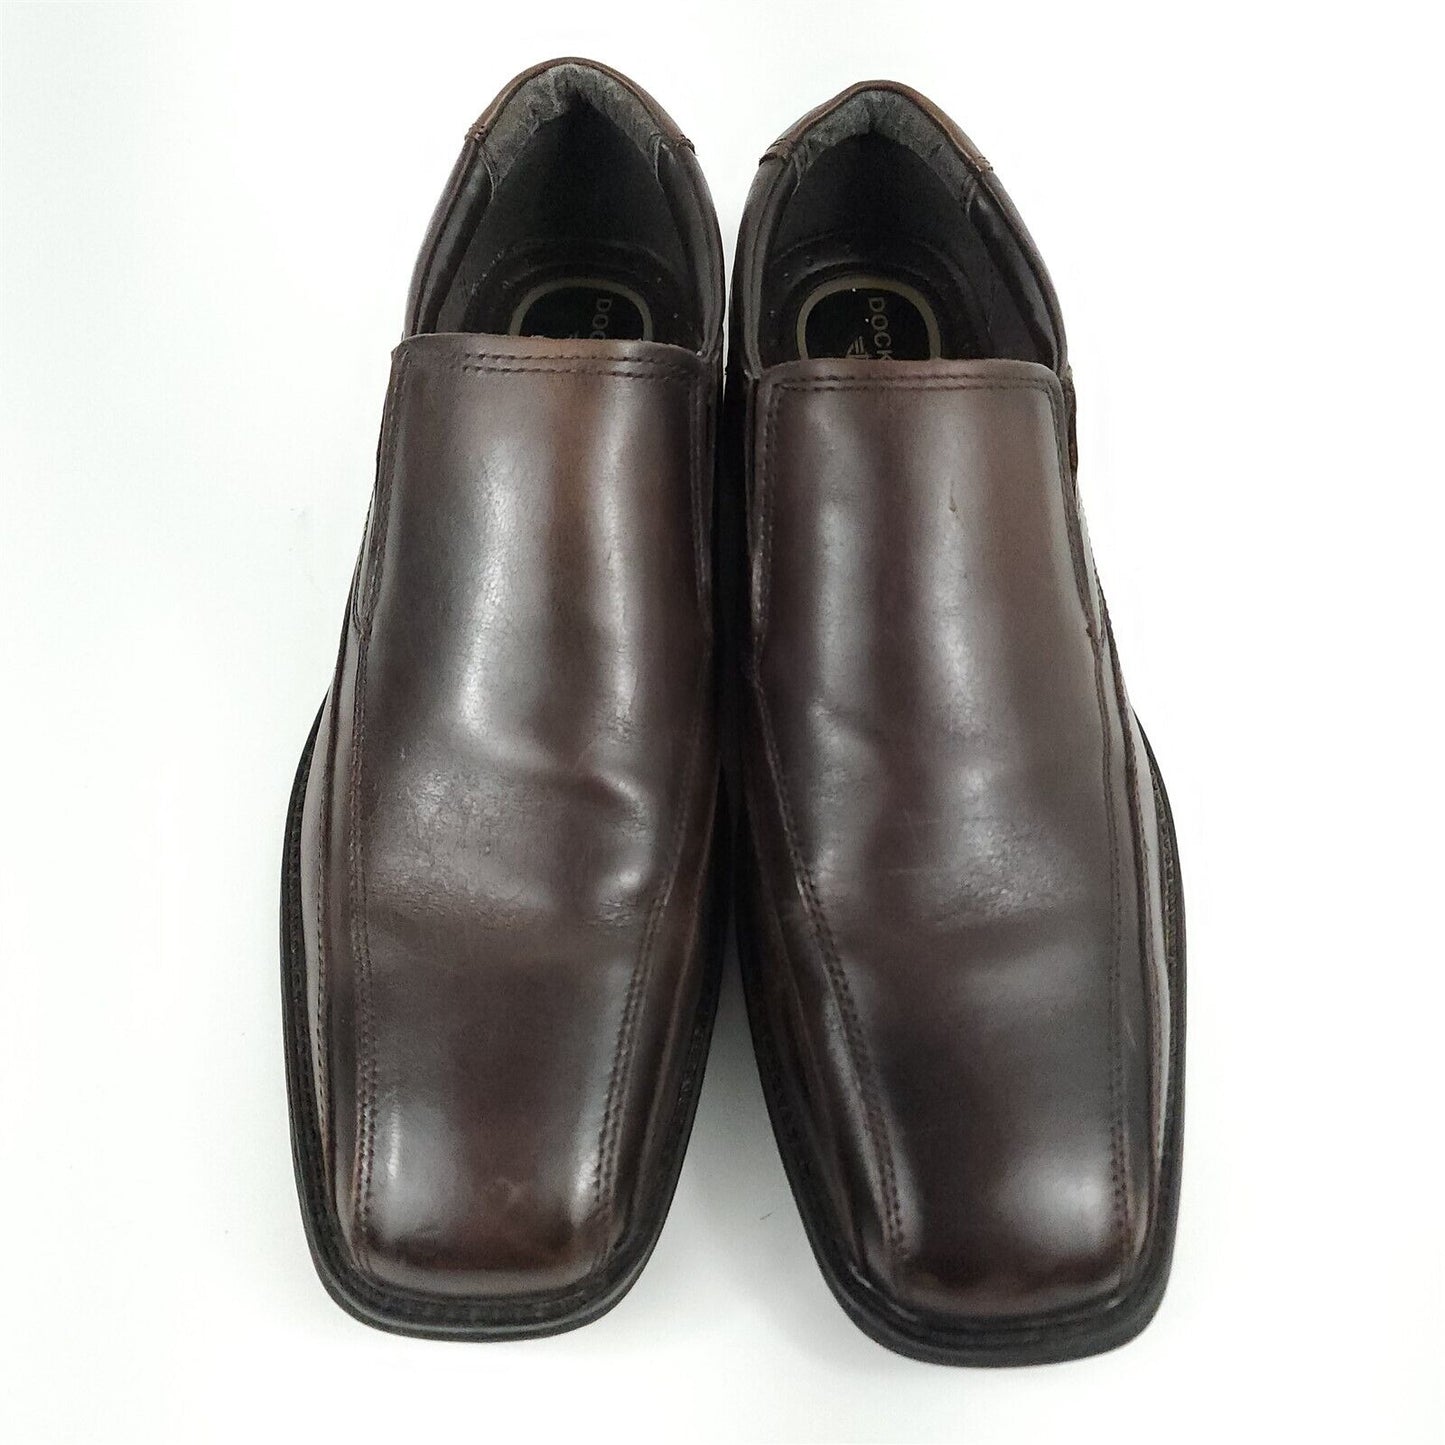 Dockers Brown Leather Franchise 90-27227 Shoes Mens Size 11.5 M